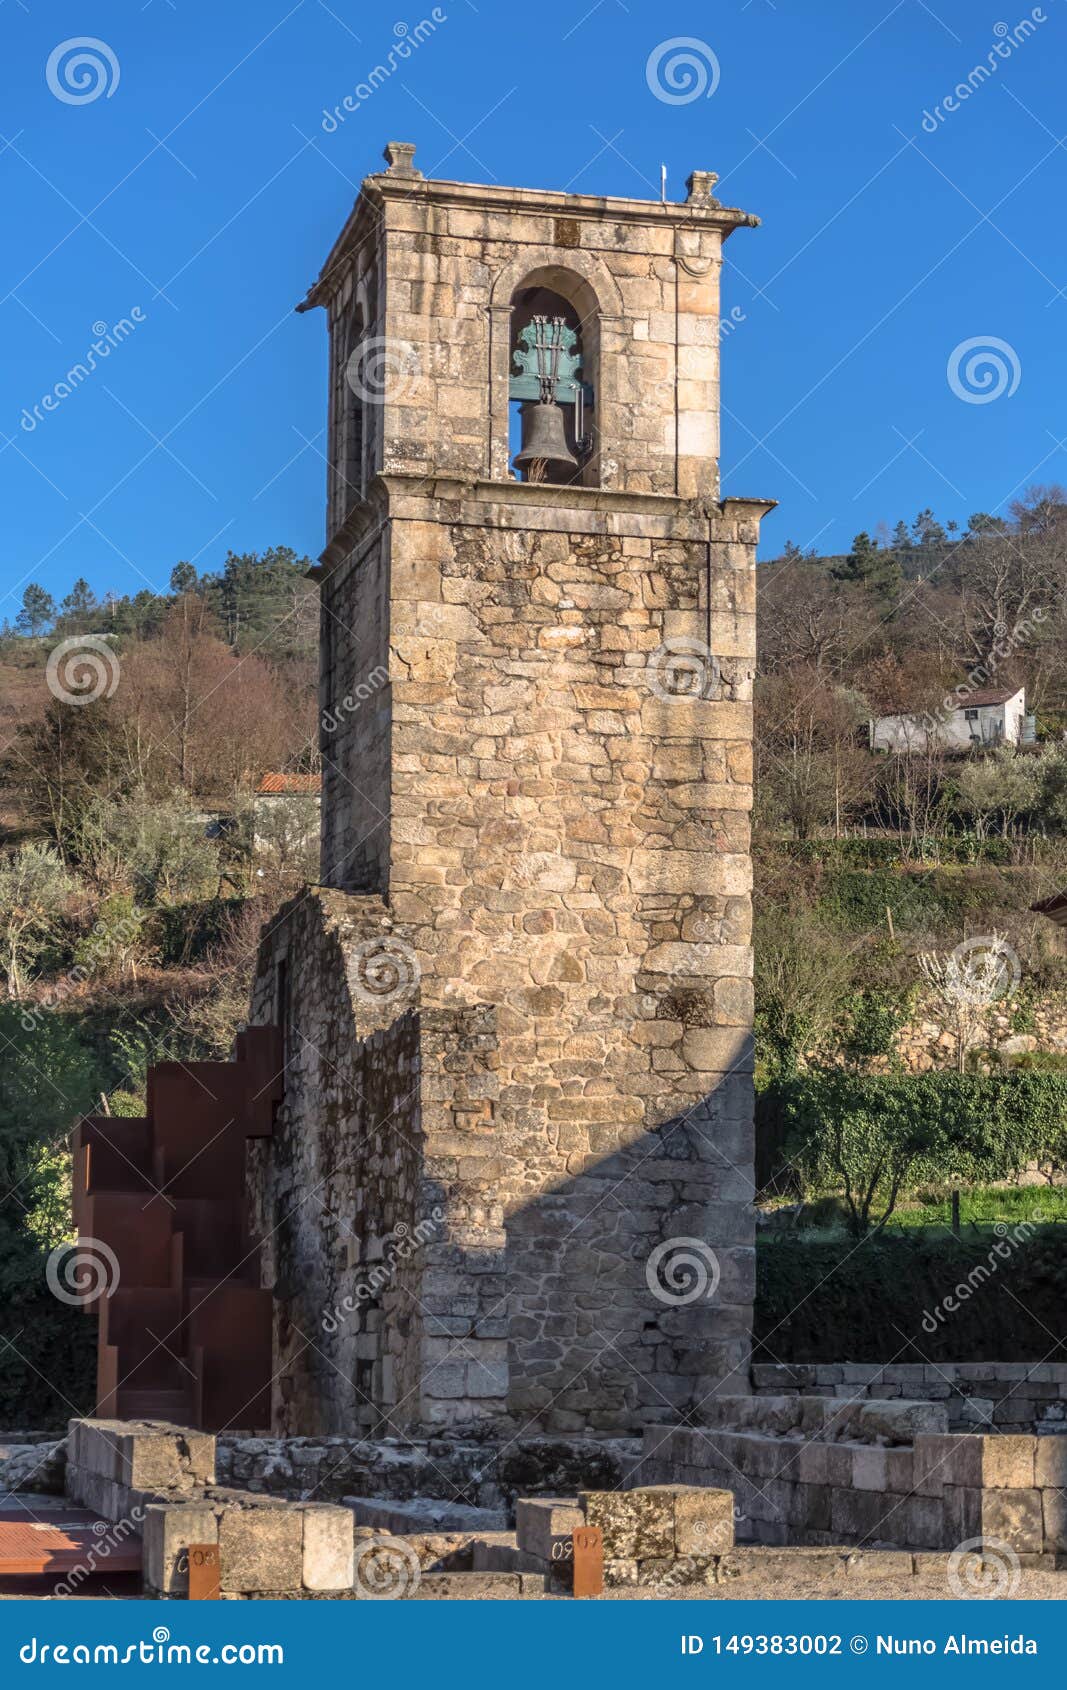 view of historic building in ruins, convent of st. joao of tarouca, detail of tower bell of the convent of cister